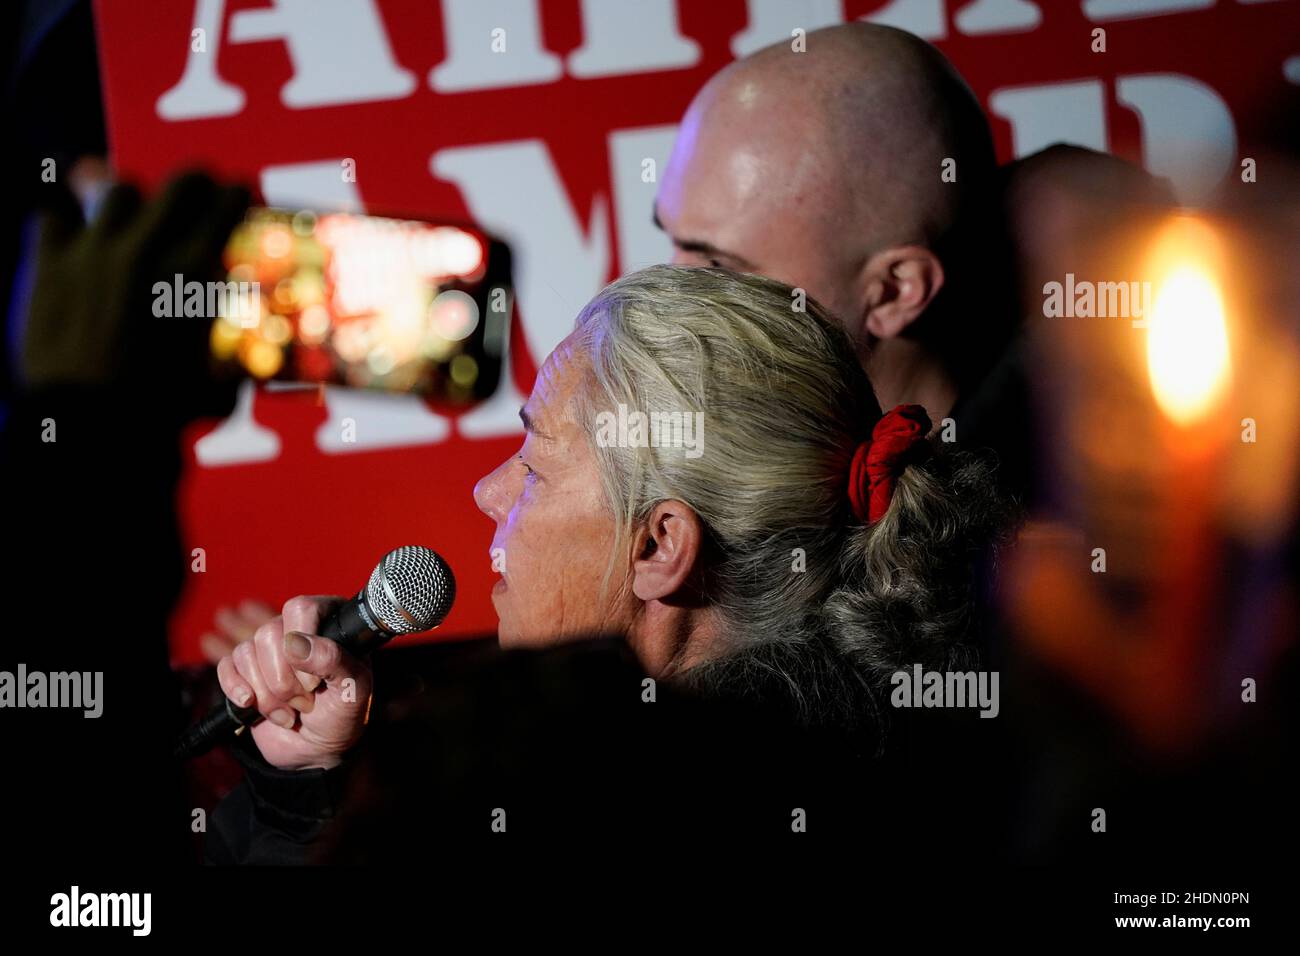 Micki Witthoeft, mother of protester Ashli Babbitt, who was shot dead by a police officer during the January 6, 2021 attack on the U.S. Capitol, talks to the media next to Matt Braynard, Executive Director of Look Ahead America, as supporters of former U.S. President Donald Trump gather outside the D.C. Jail in Washington to protest the detention of those who have been charged with various offenses during the January 6, 2021 attack on the U.S. Capitol by Trump supporters, in Washington, U.S., January 6, 2022. REUTERS/Elizabeth Frantz Stock Photo